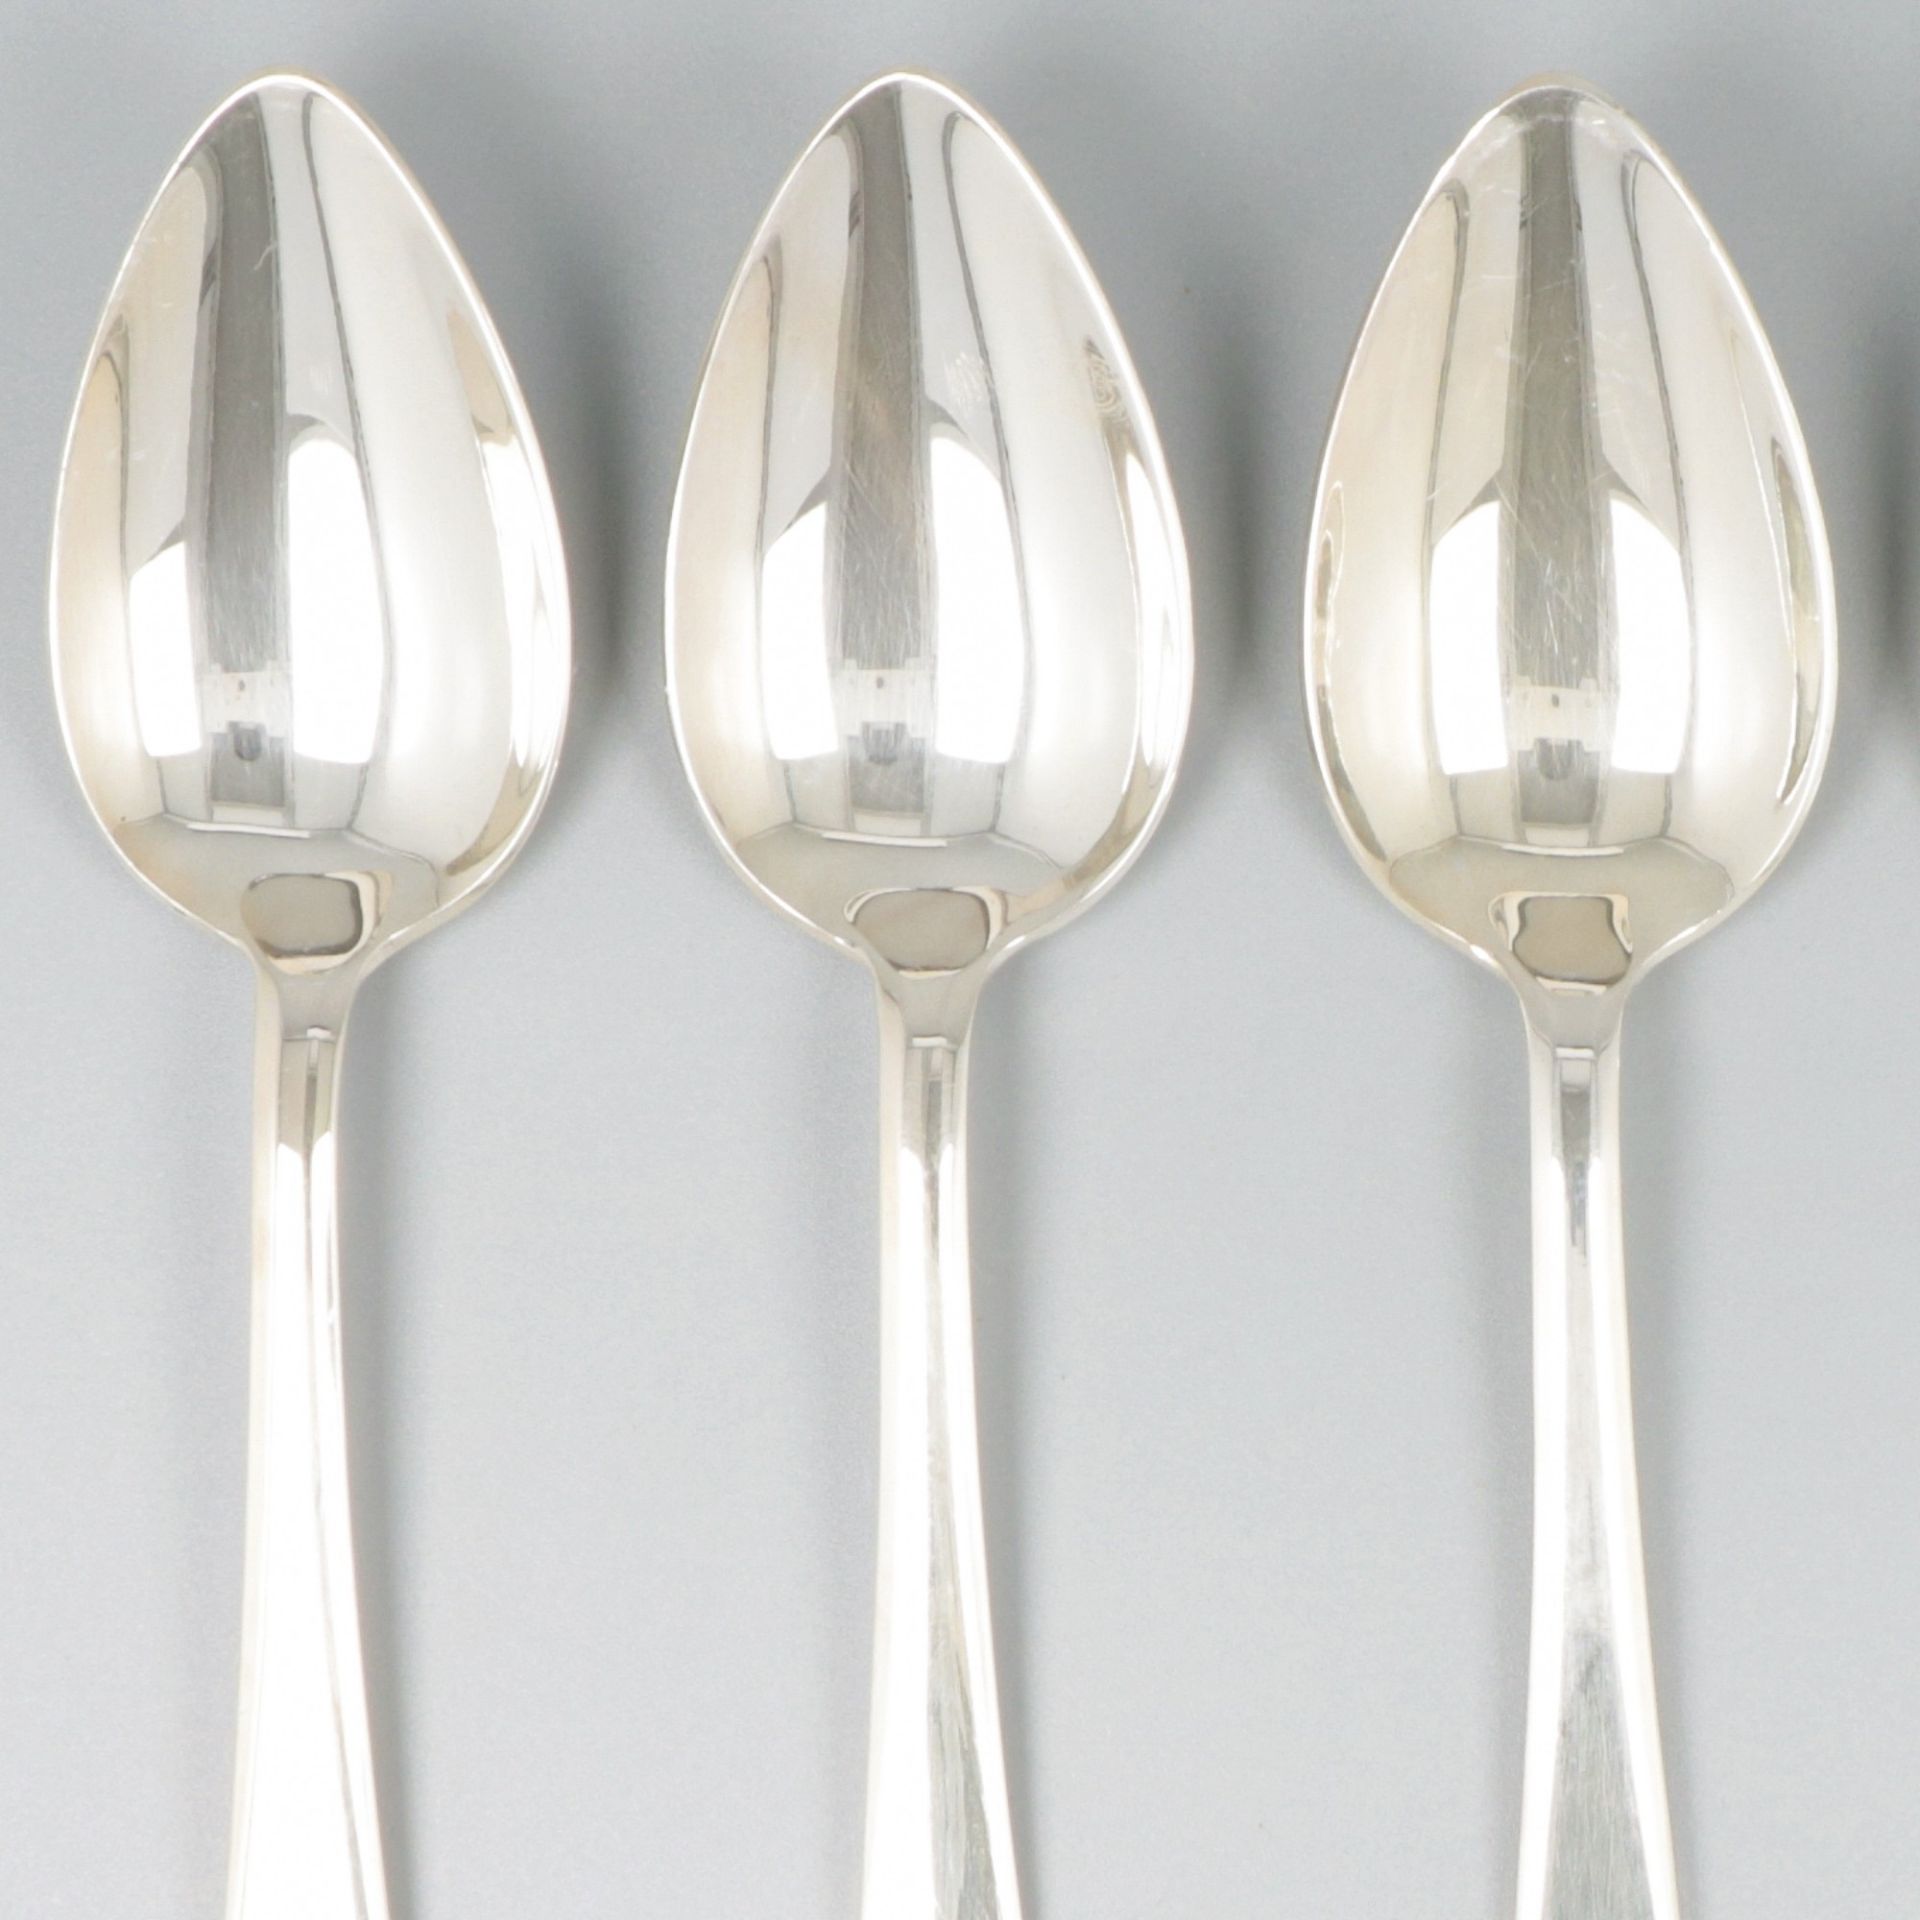 6 piece set of spoons "Haags Lofje" silver. - Image 3 of 5